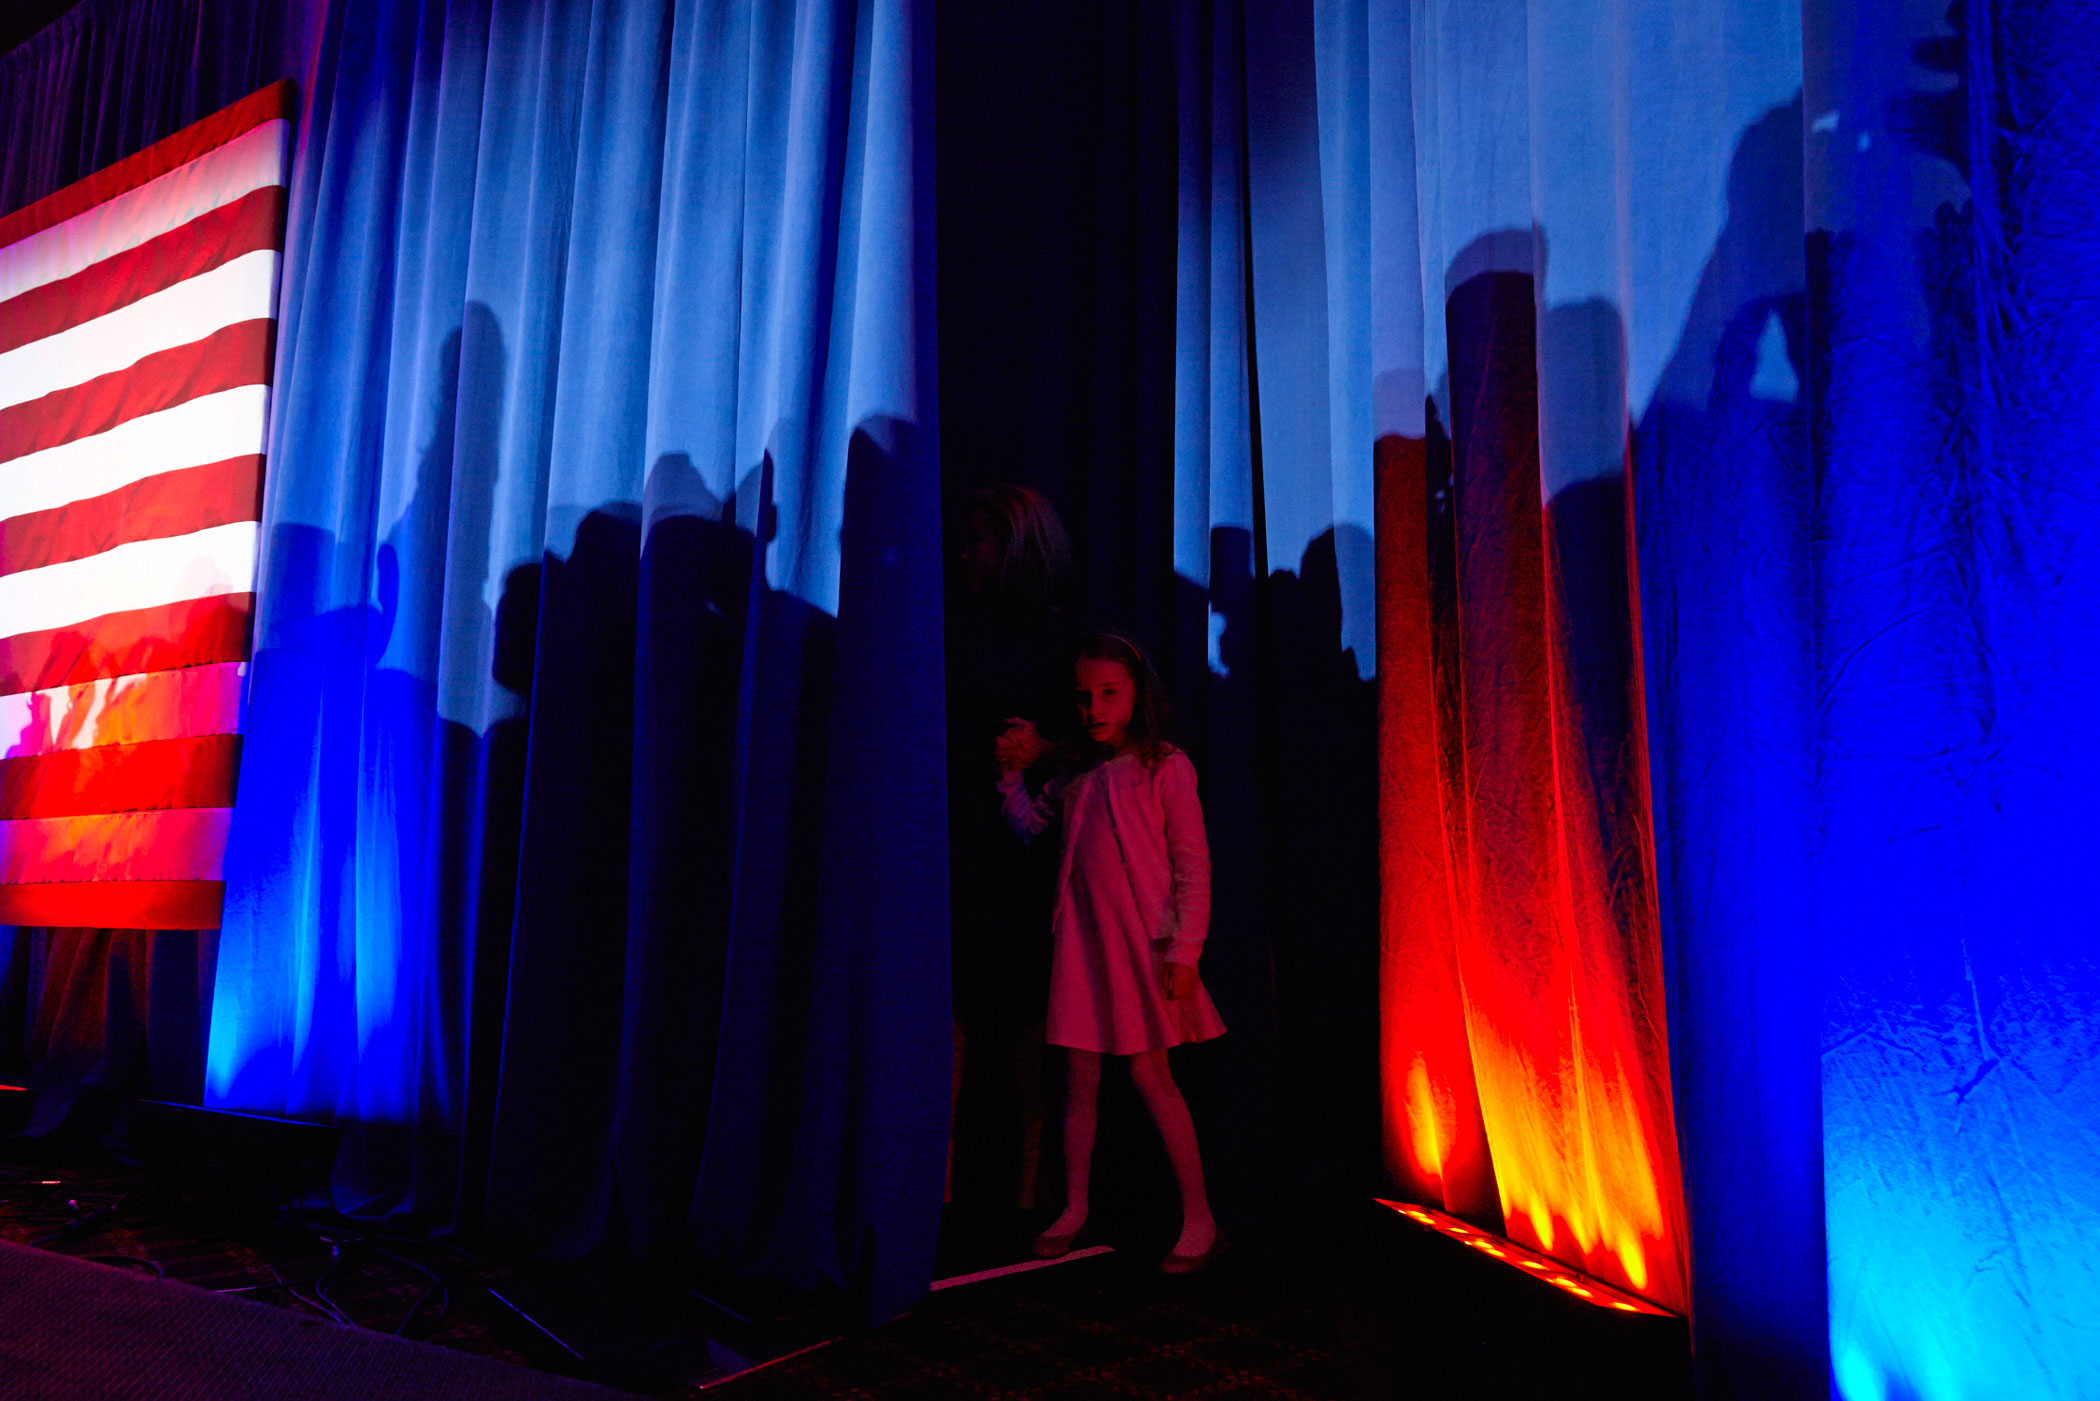 Republican presidential candidate Ted Cruz's daughter peers out from a curtain during the Texas Senator's primary night campaign event on April 5, 2016, in Milwaukee.